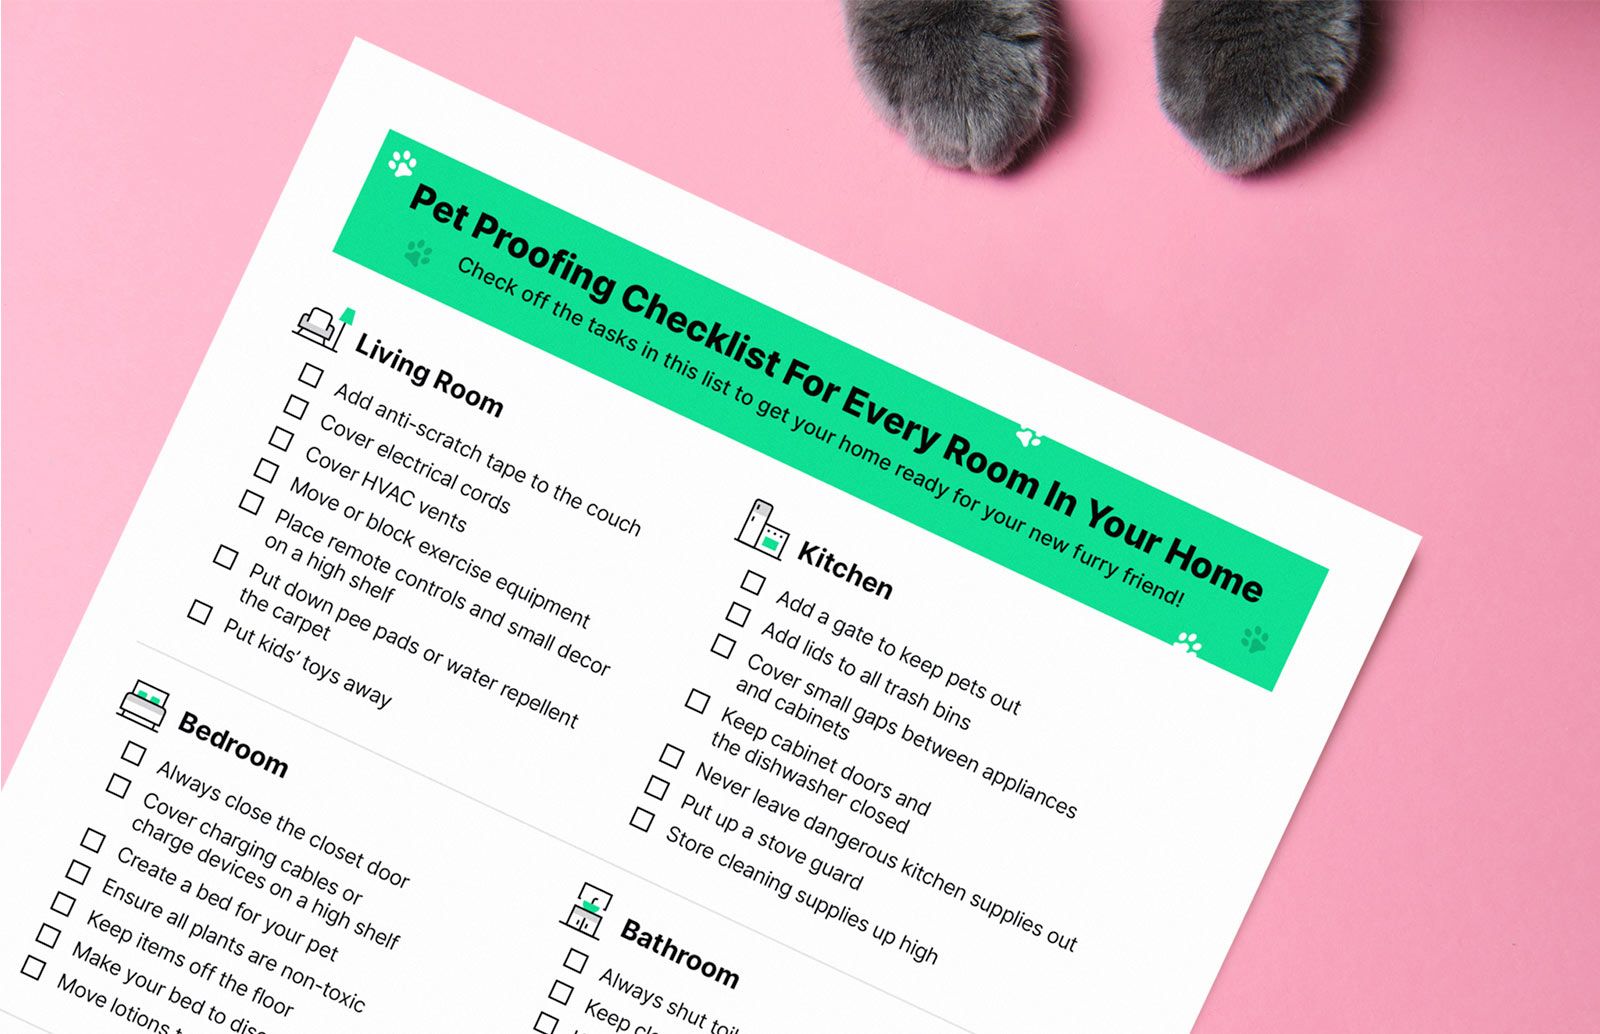 A pet proofing checklist on a piece of paper with a pink background and cat paws nearby